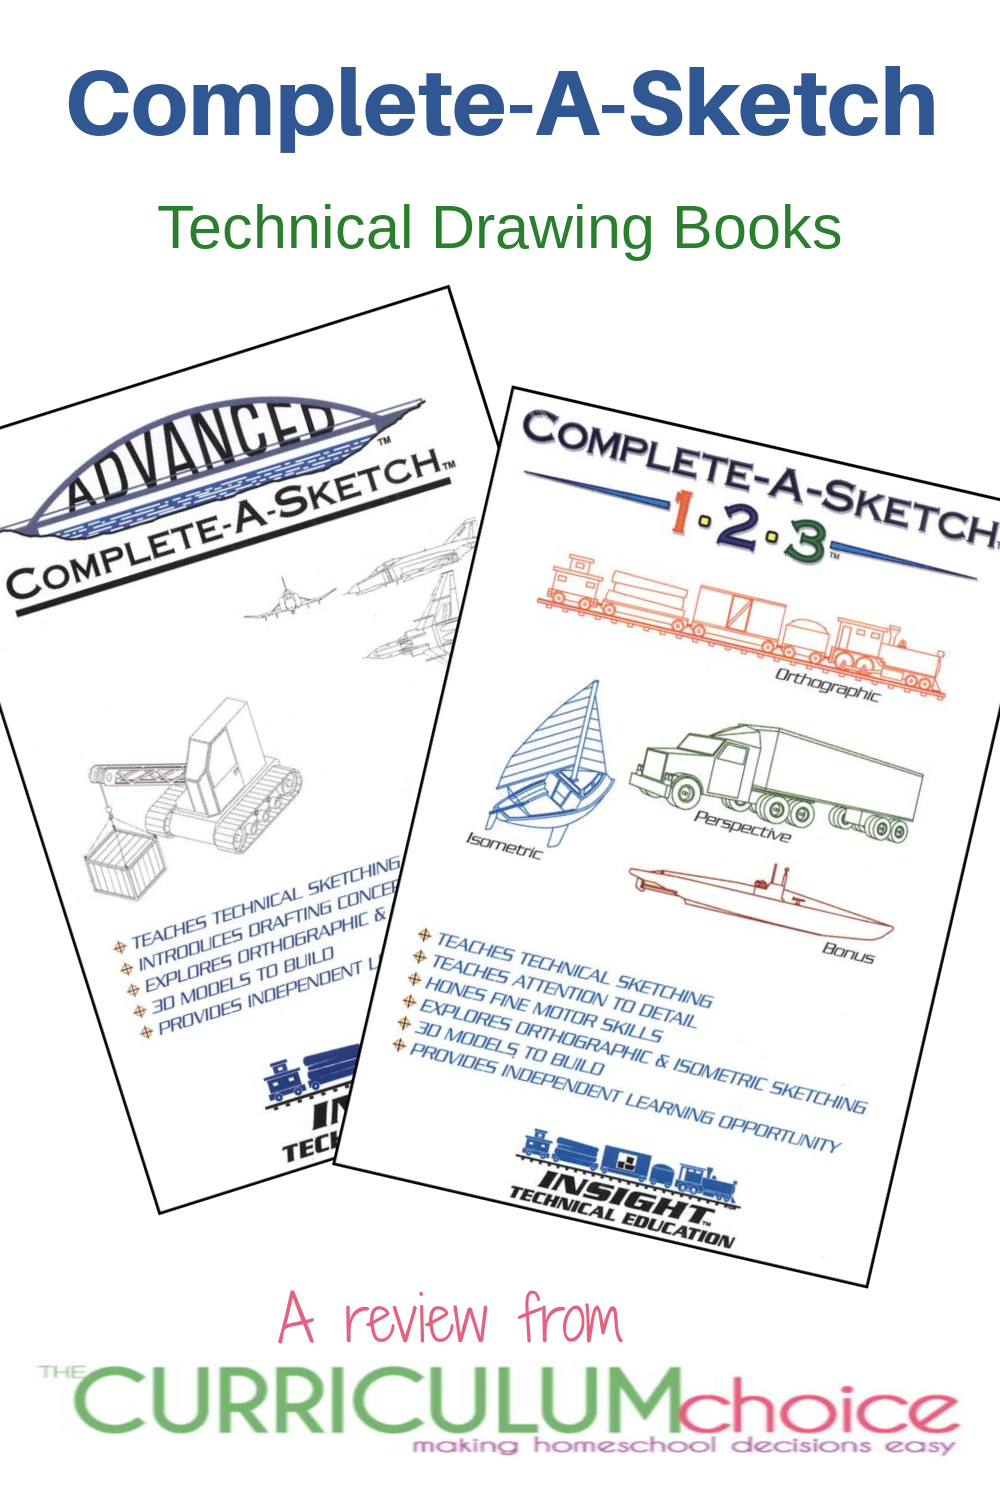 Complete-A-Sketch from Insight Technical Education is a series of technical art books that help form a base for drafting and CAD work. A review from The Curriculum Choice